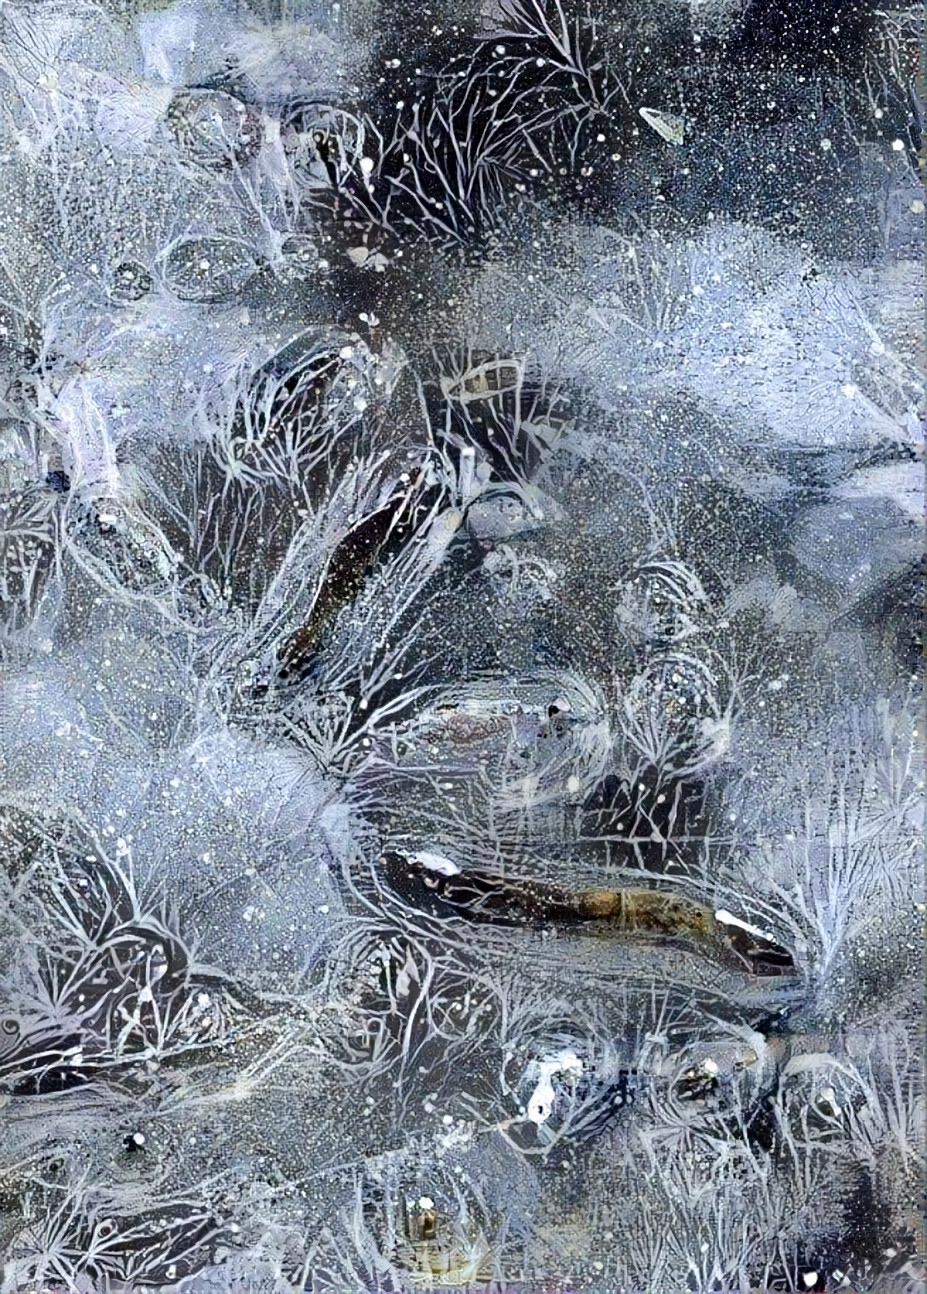 Twigs Encased In Ice ~ My Image